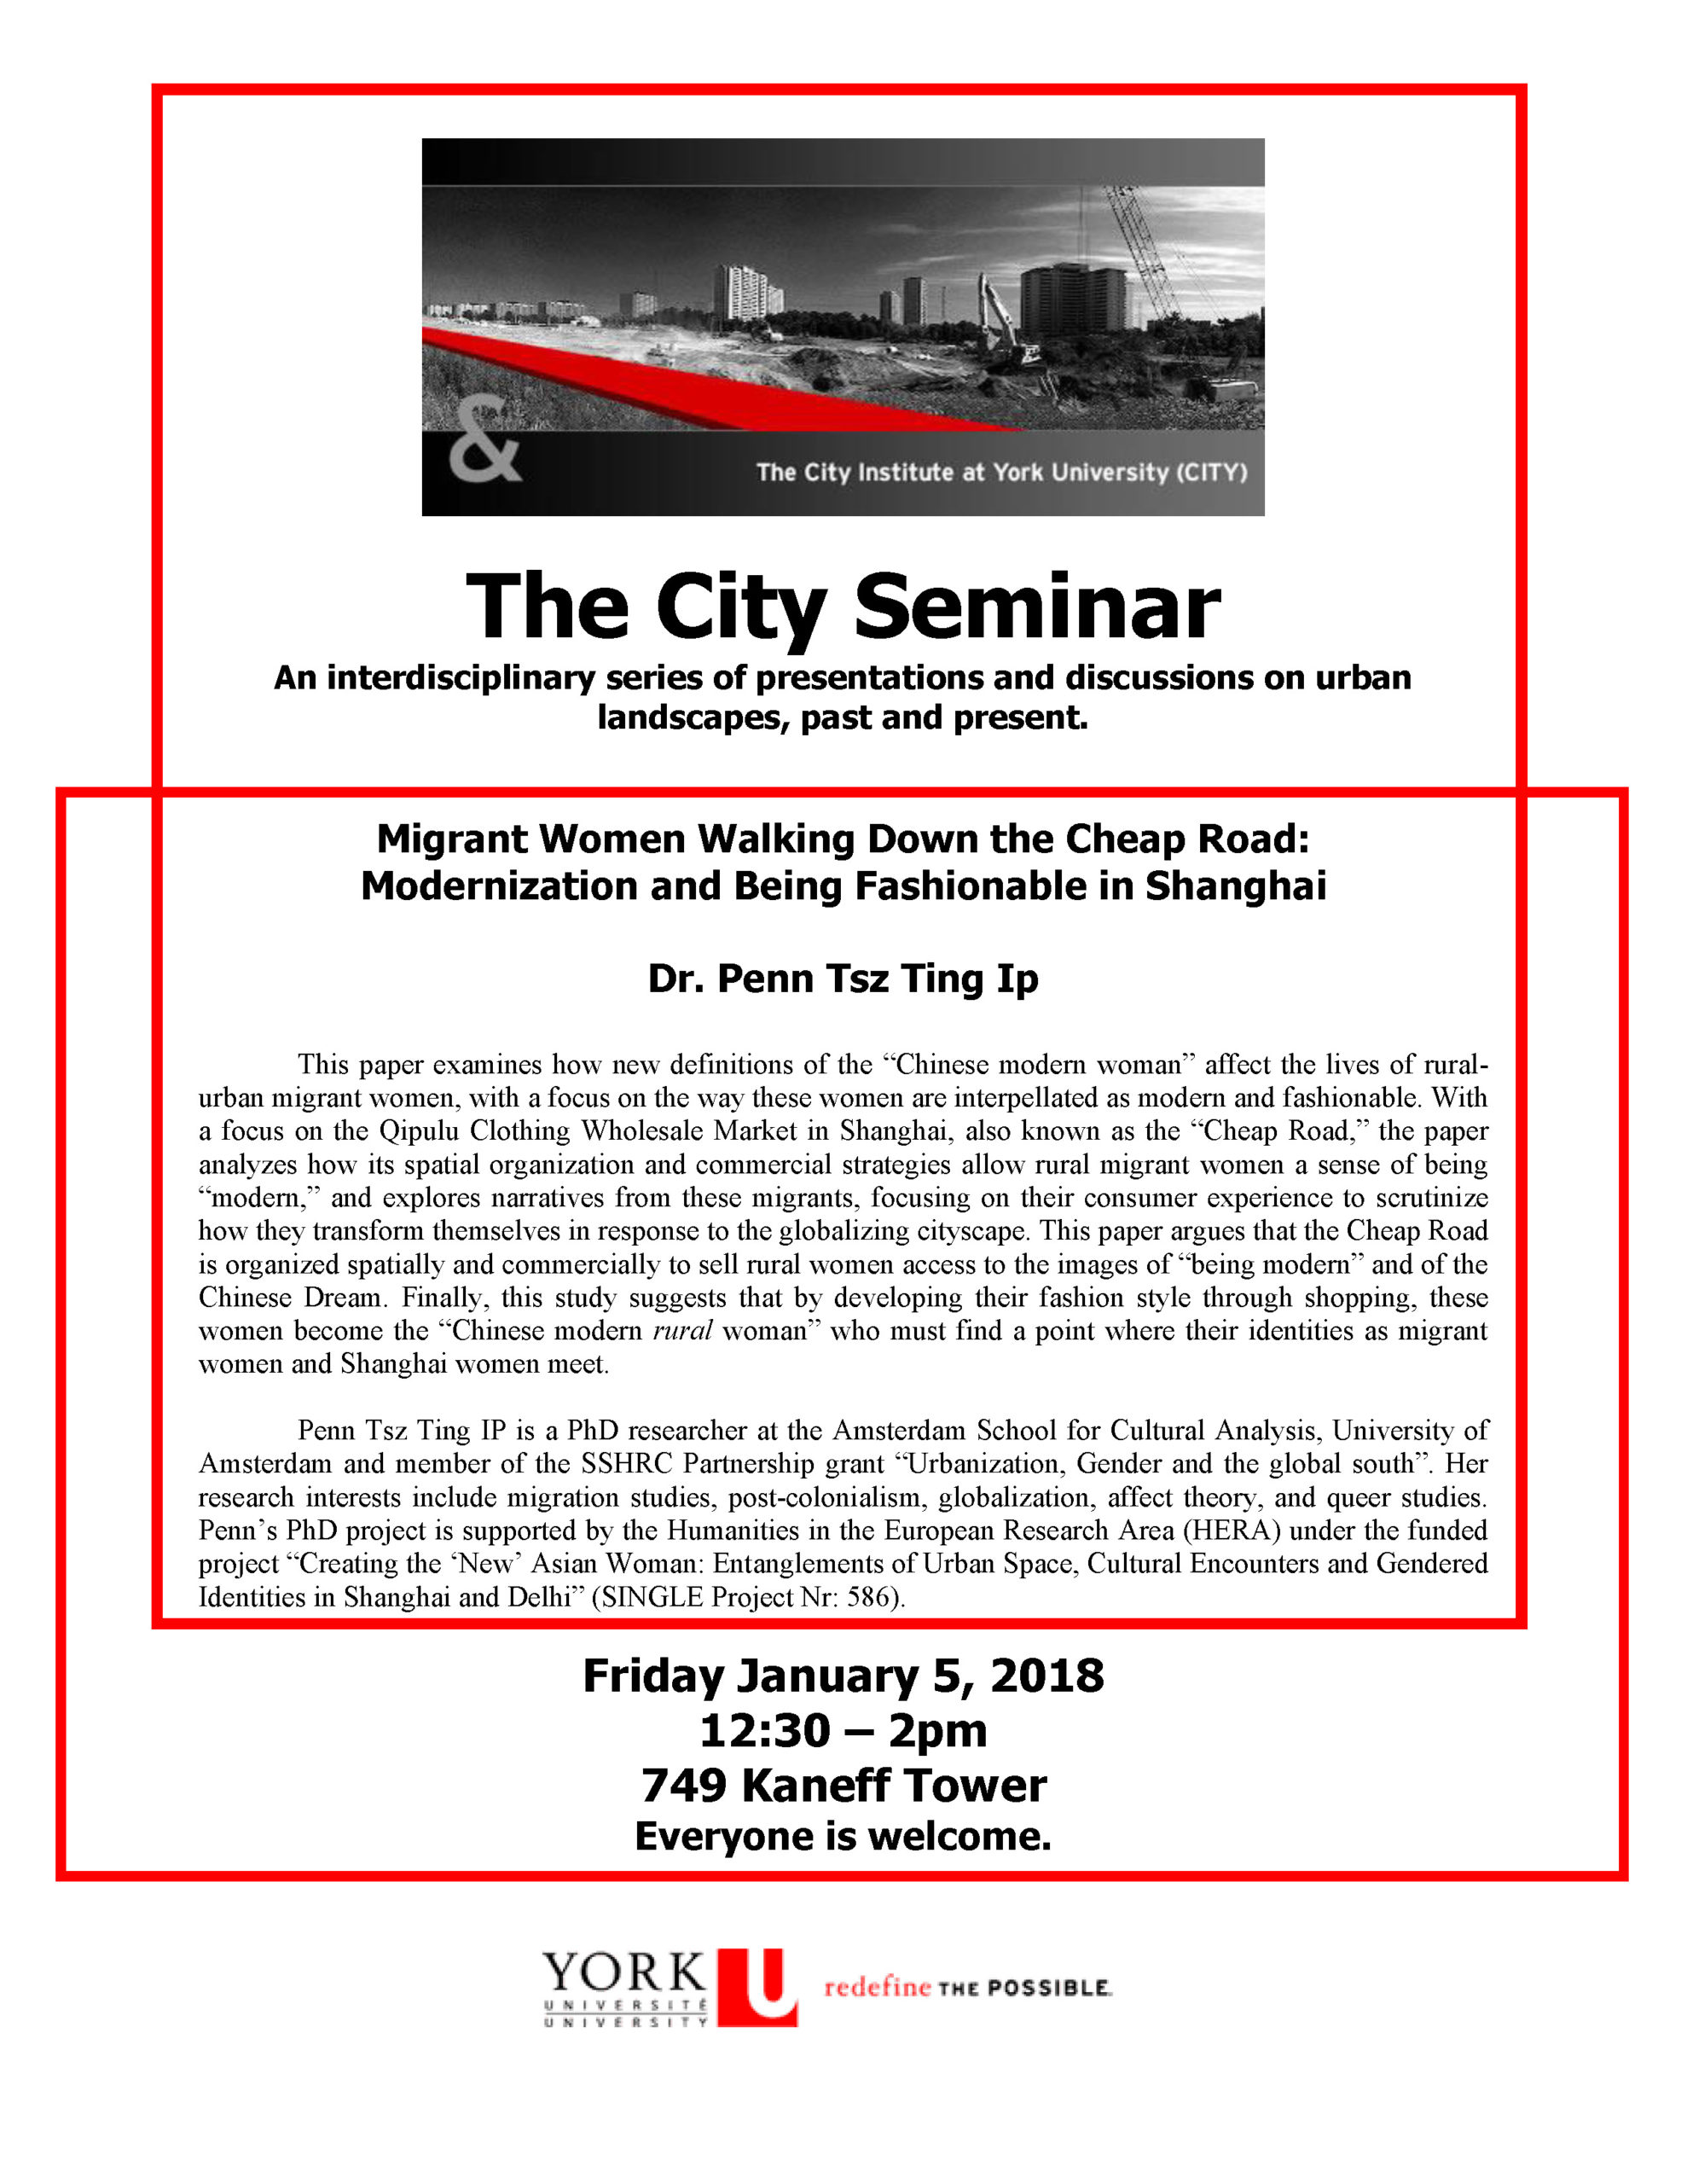 'Migrant Women Walking Down the Cheap Road: Modernization and Being Fashionable in Shanghai', with description of paper and event details.